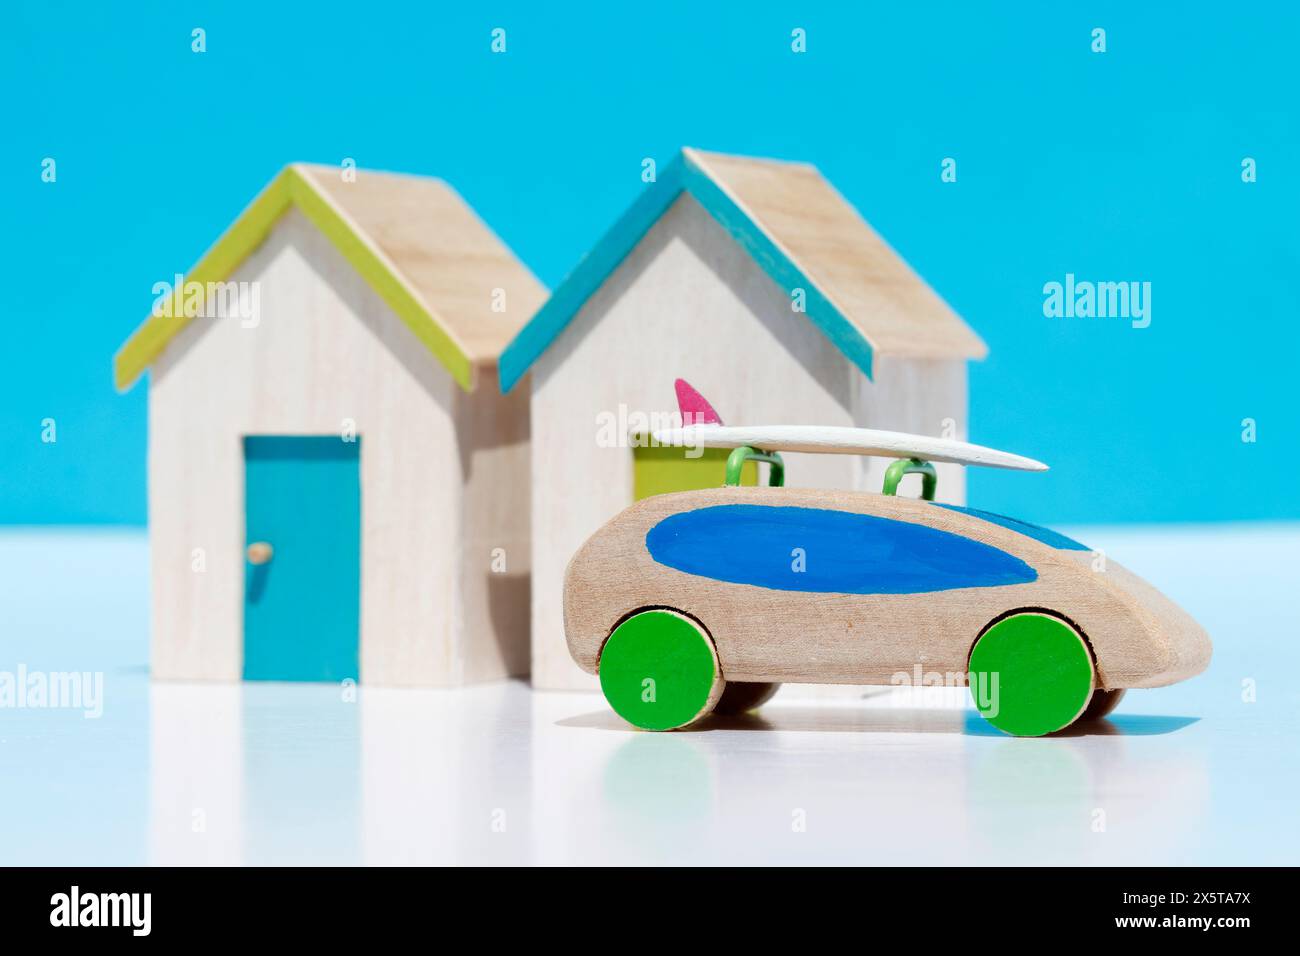 Model beach huts and car with surfboard Stock Photo